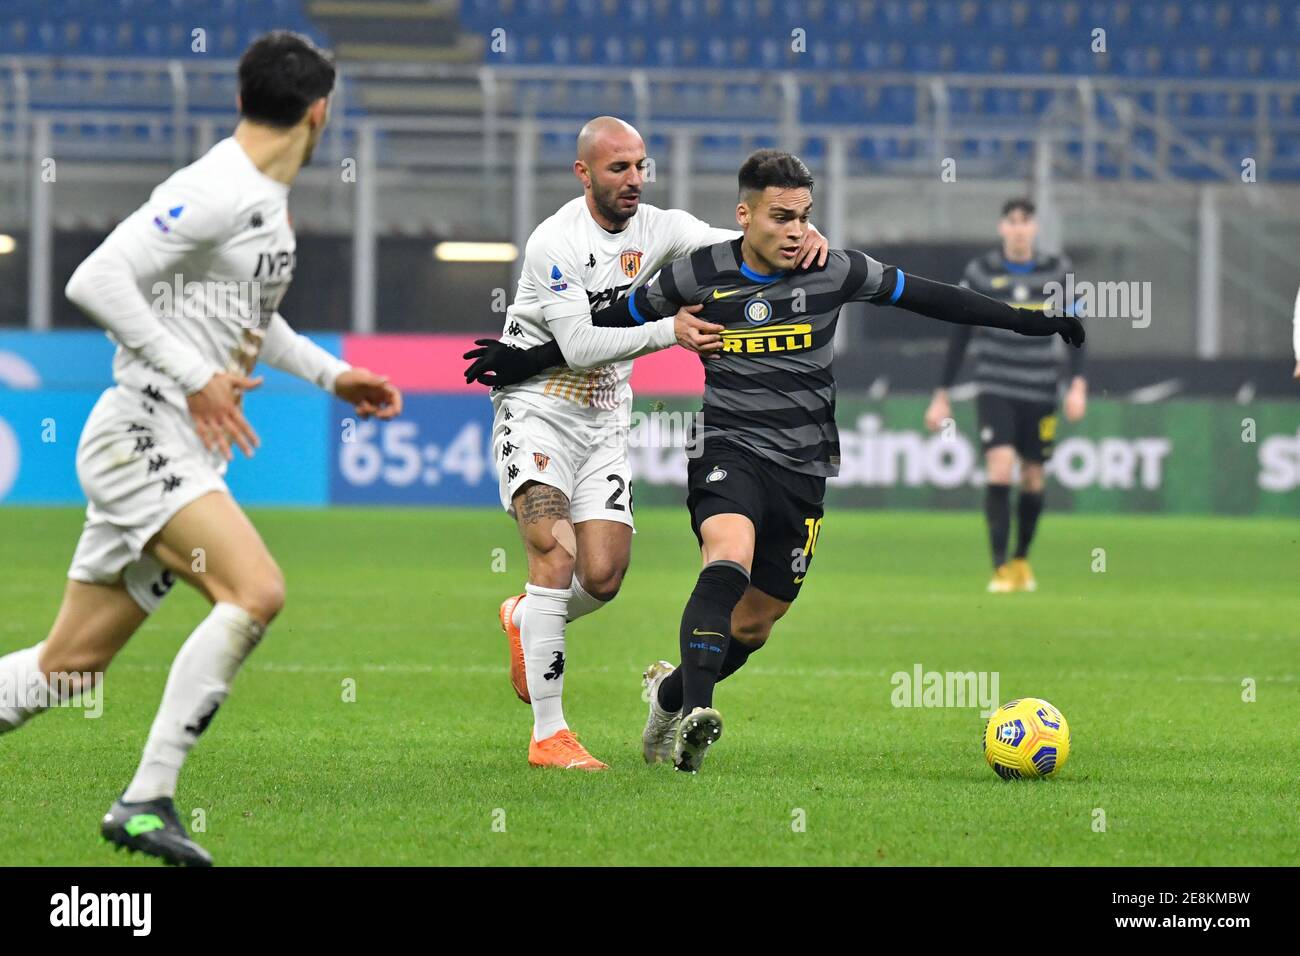 Milano, Italy. 30th, January 2021. Lautaro Martinez (10) of Inter Milan and Pasquale Schiattarella (28) of Benevento seen in the Serie A match between Inter Milan and Benevento at Giuseppe Meazza in Milano. (Photo credit: Gonzales Photo - Tommaso Fimiano). Stock Photo